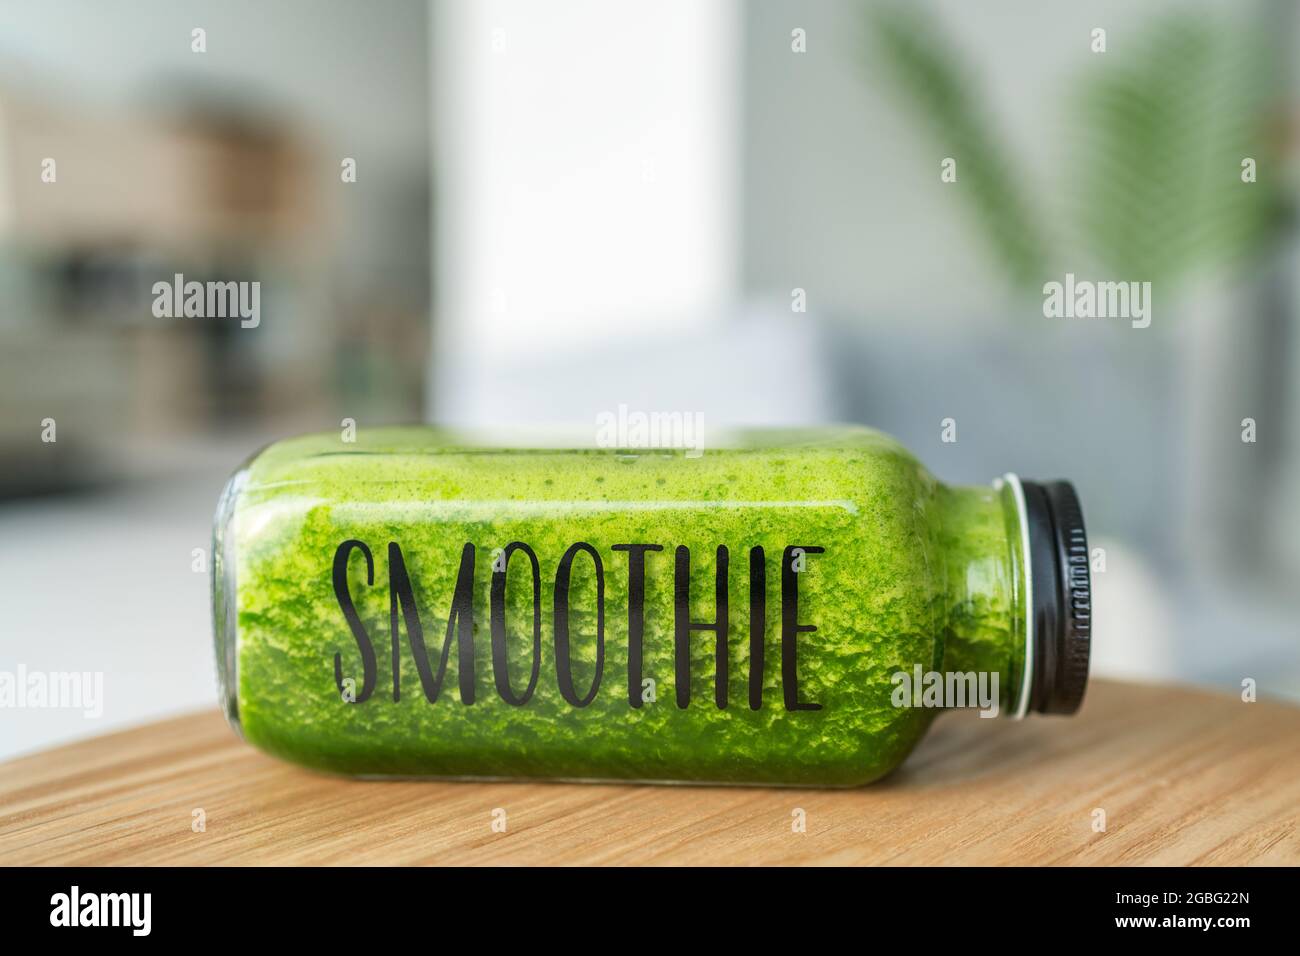 Green smoothie juice glass bottle eco-friendly health shop cafe. With word SMOOTHIE written on label Stock Photo